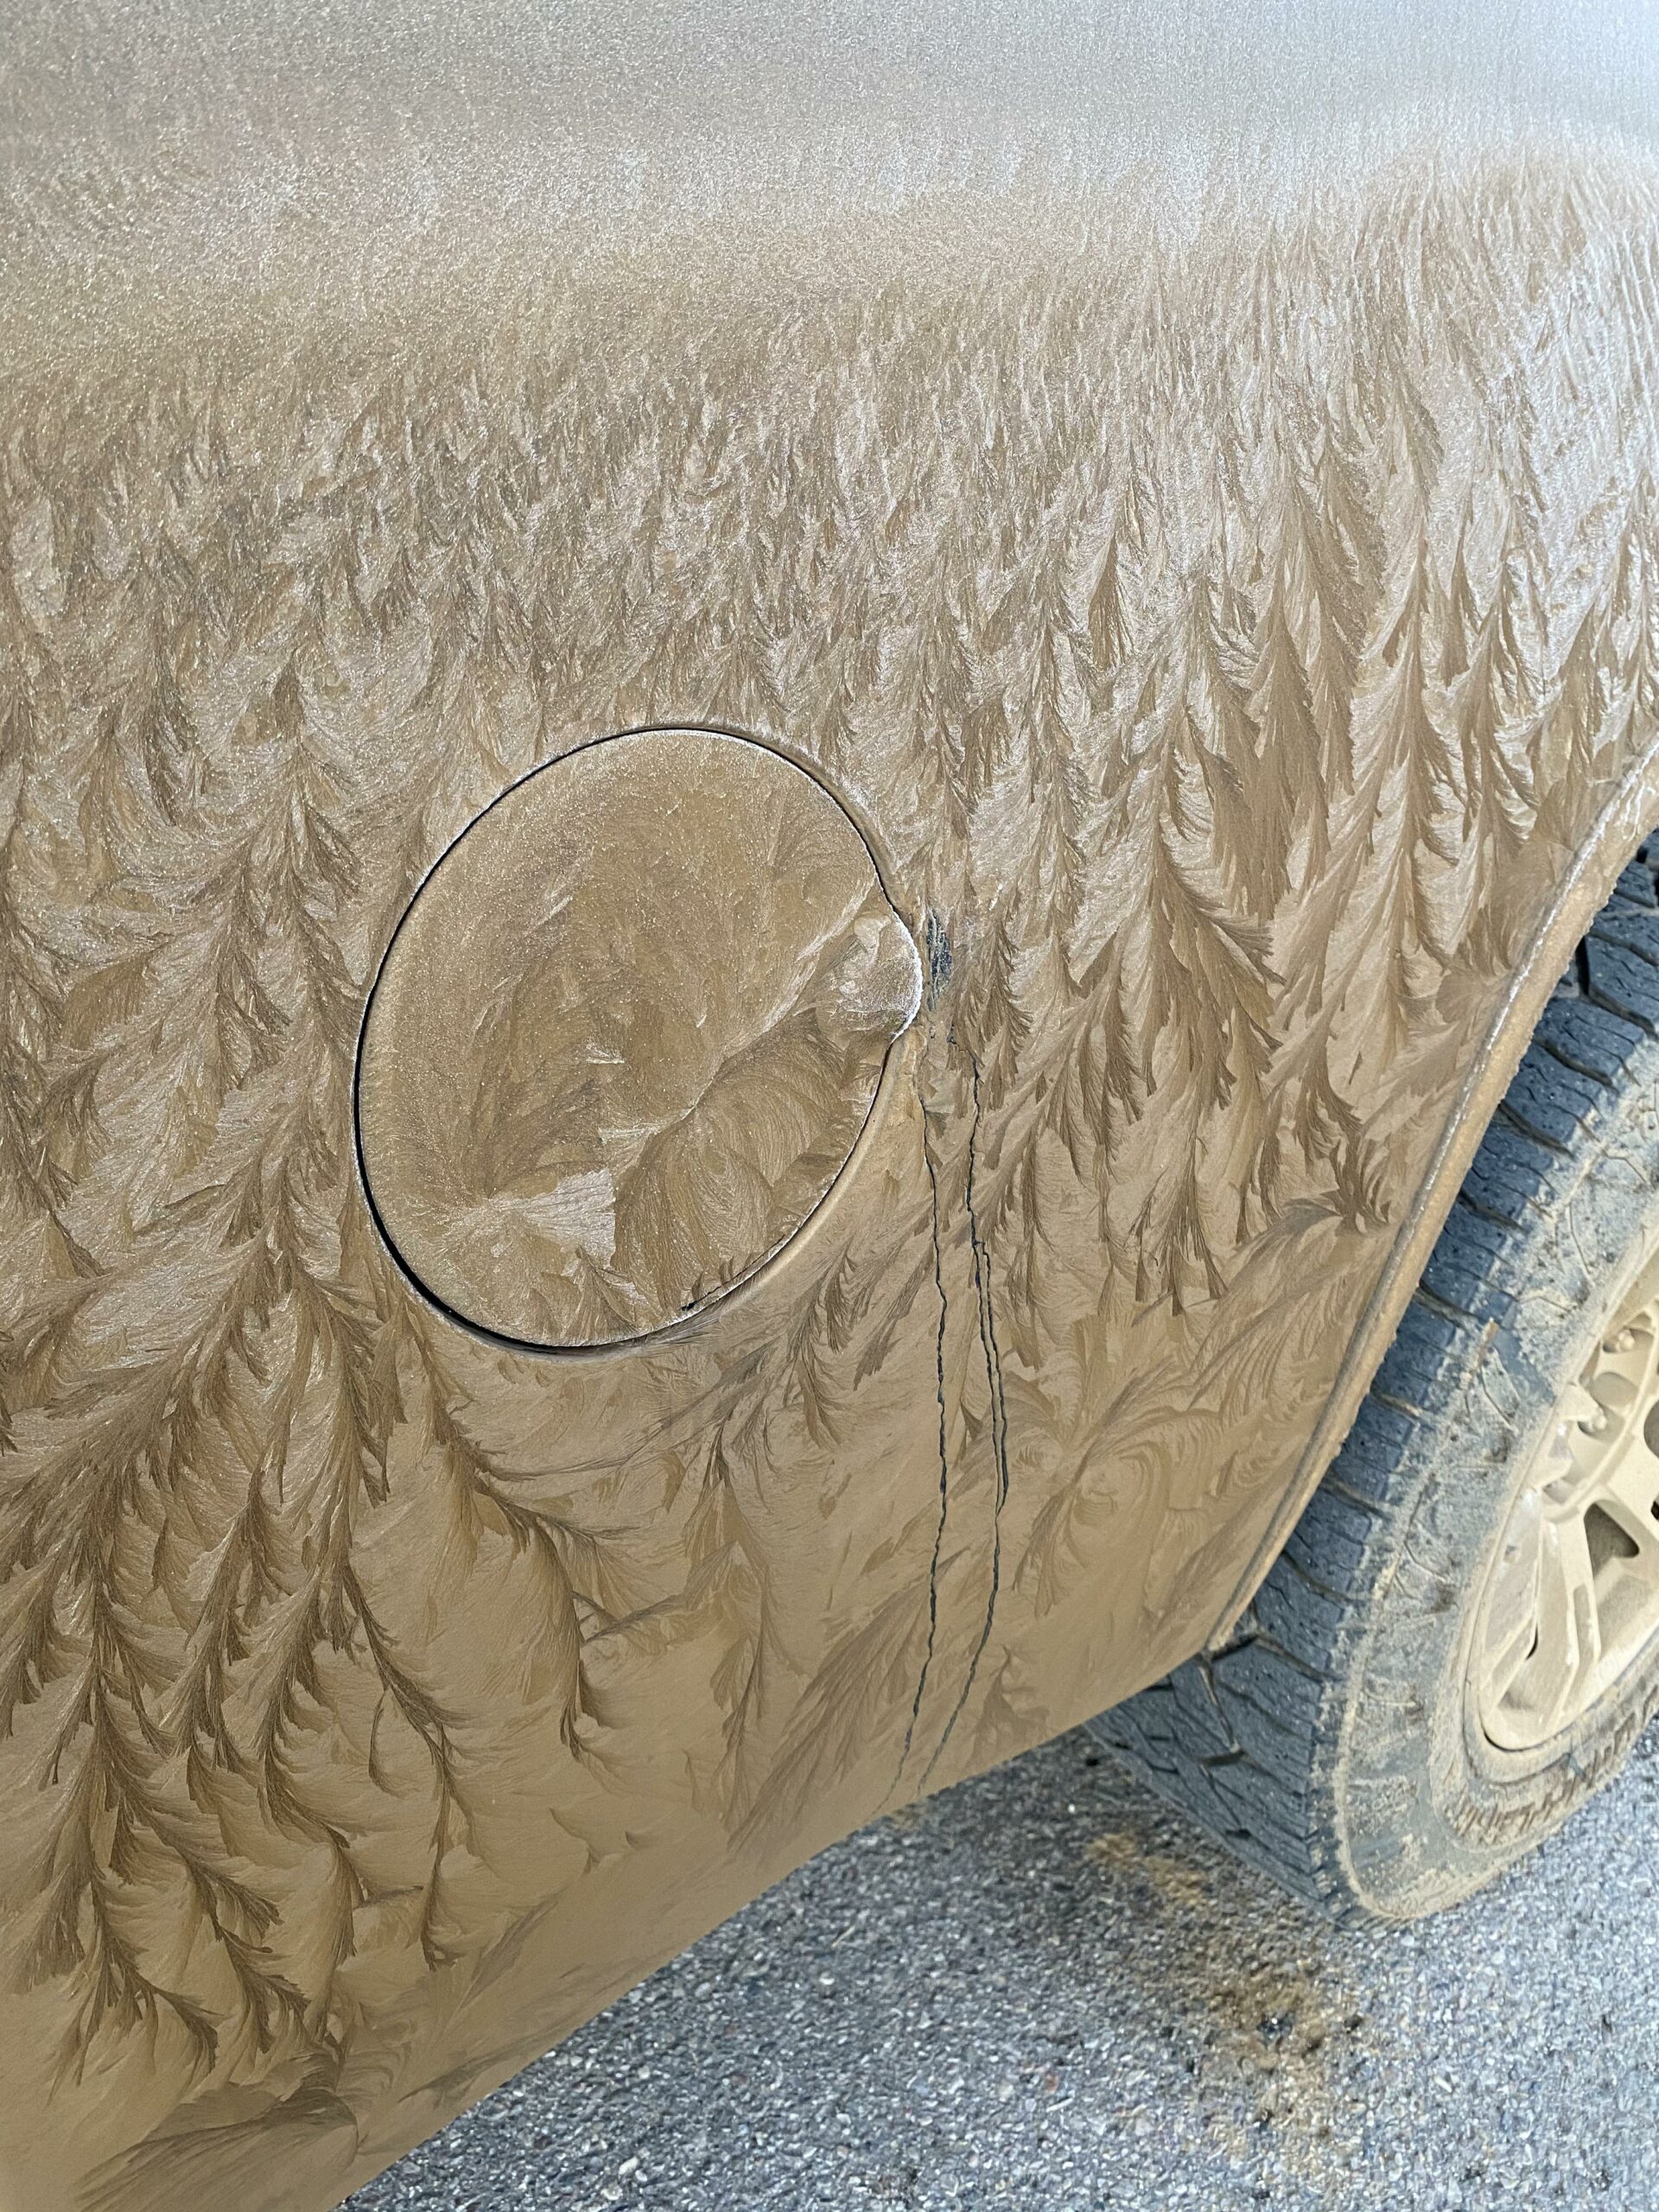 mud that looks like a pine forest frozen onto the side of a truck.